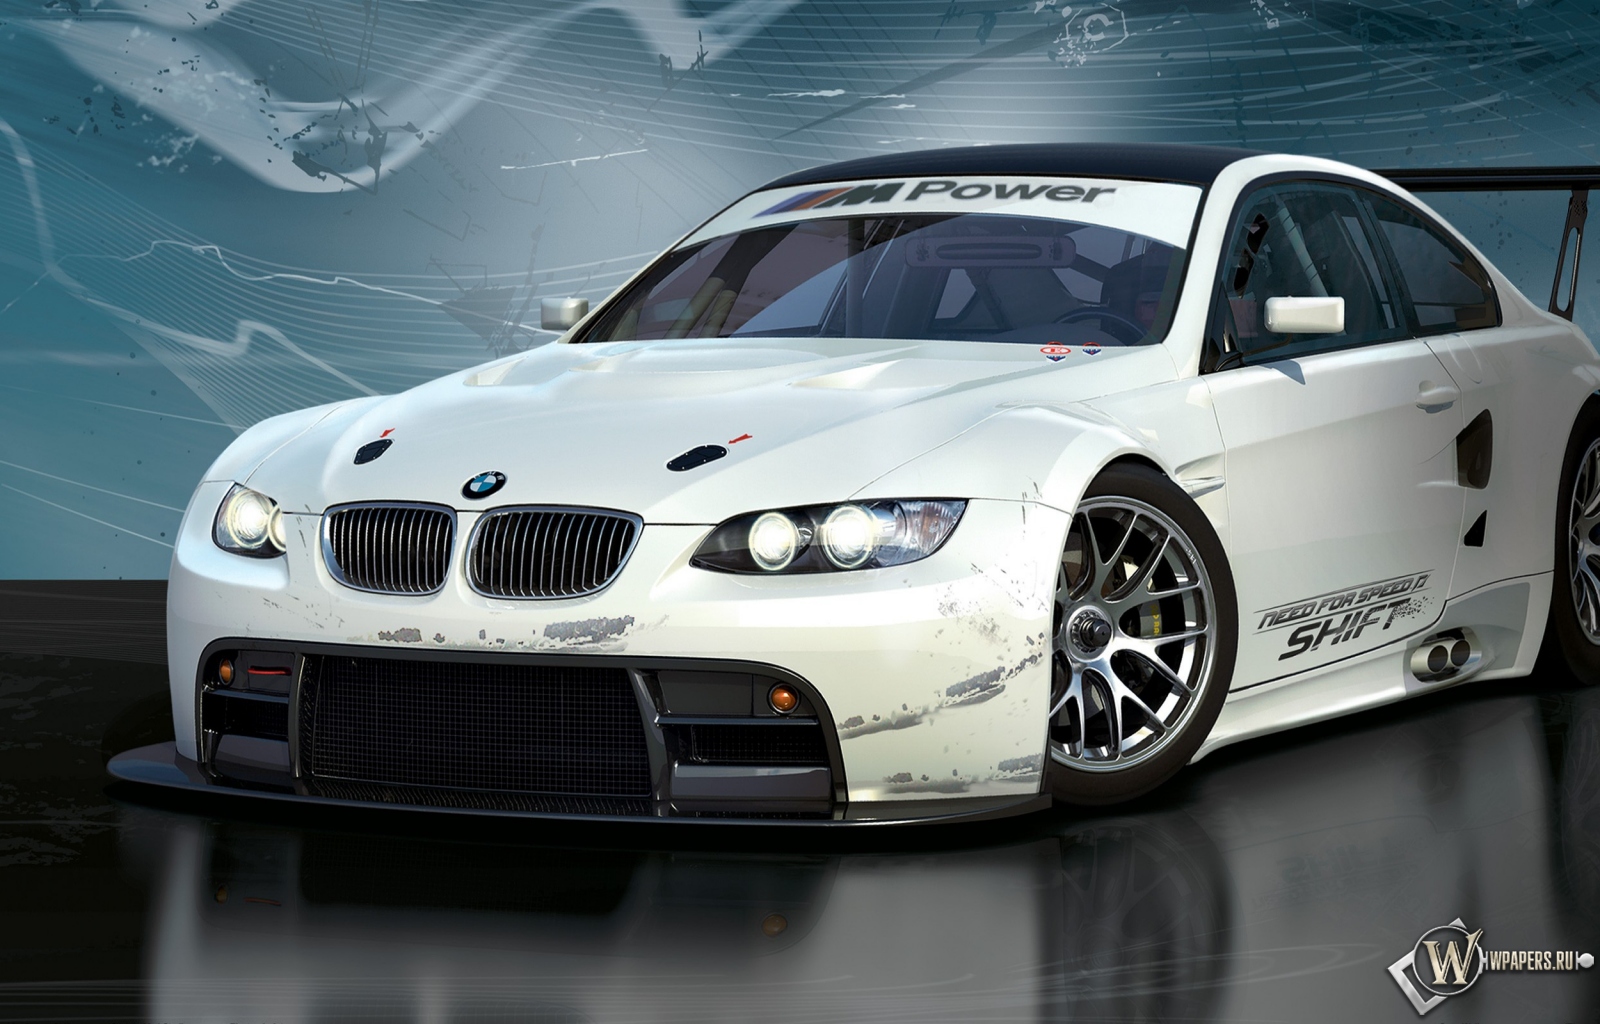 Need for speed shift 1600x1024